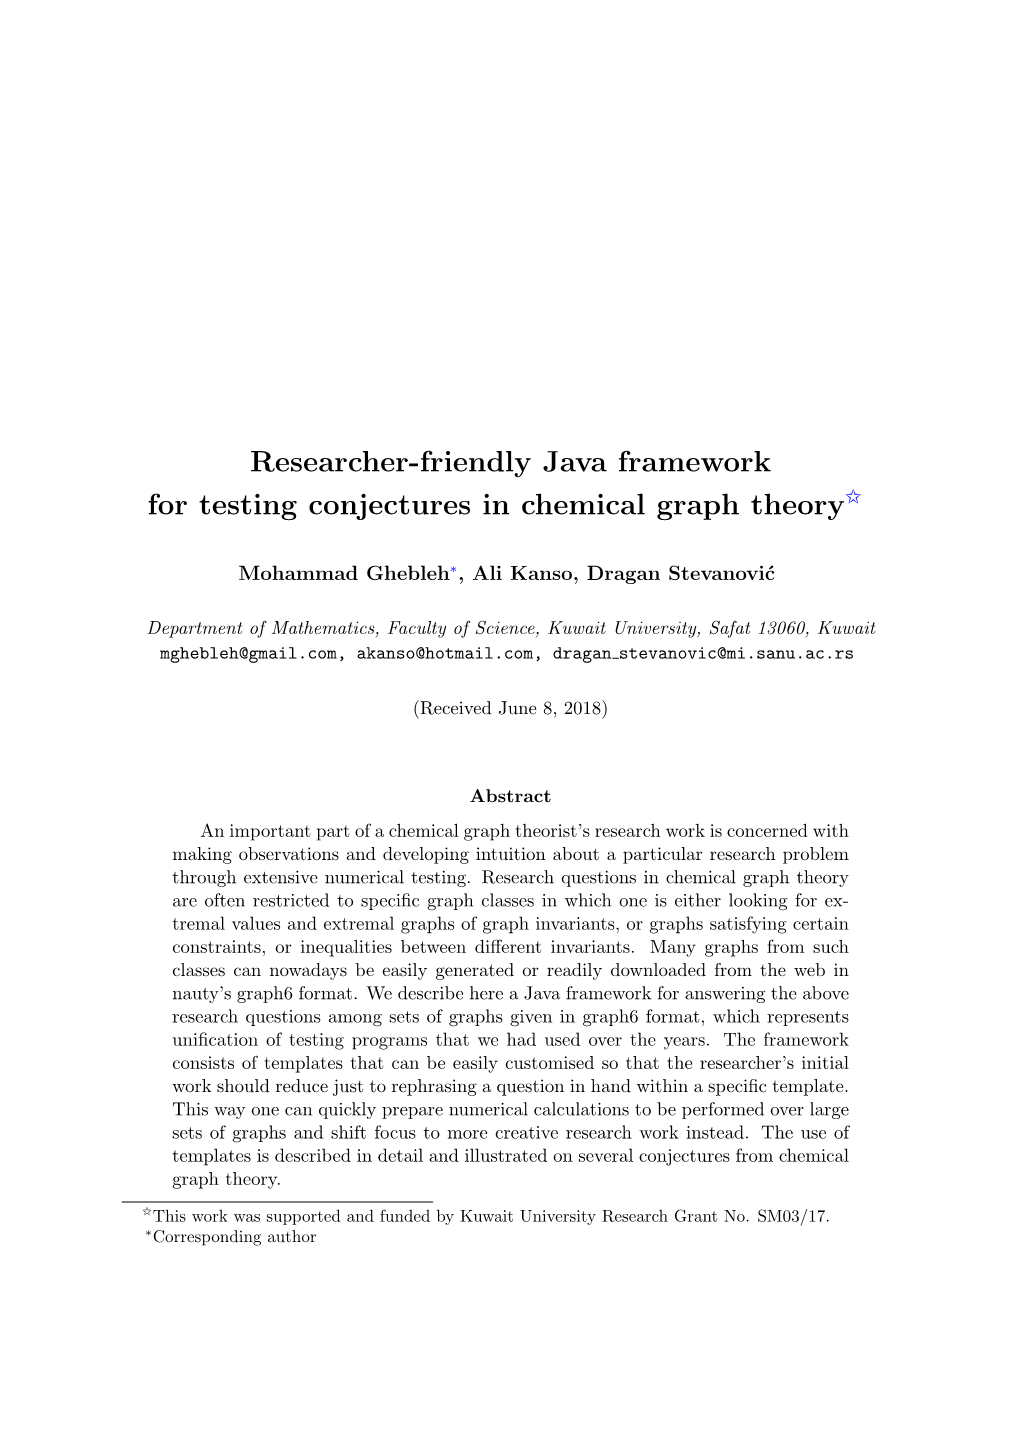 Researcher-Friendly Java Framework for Testing Conjectures in Chemical Graph Theory$